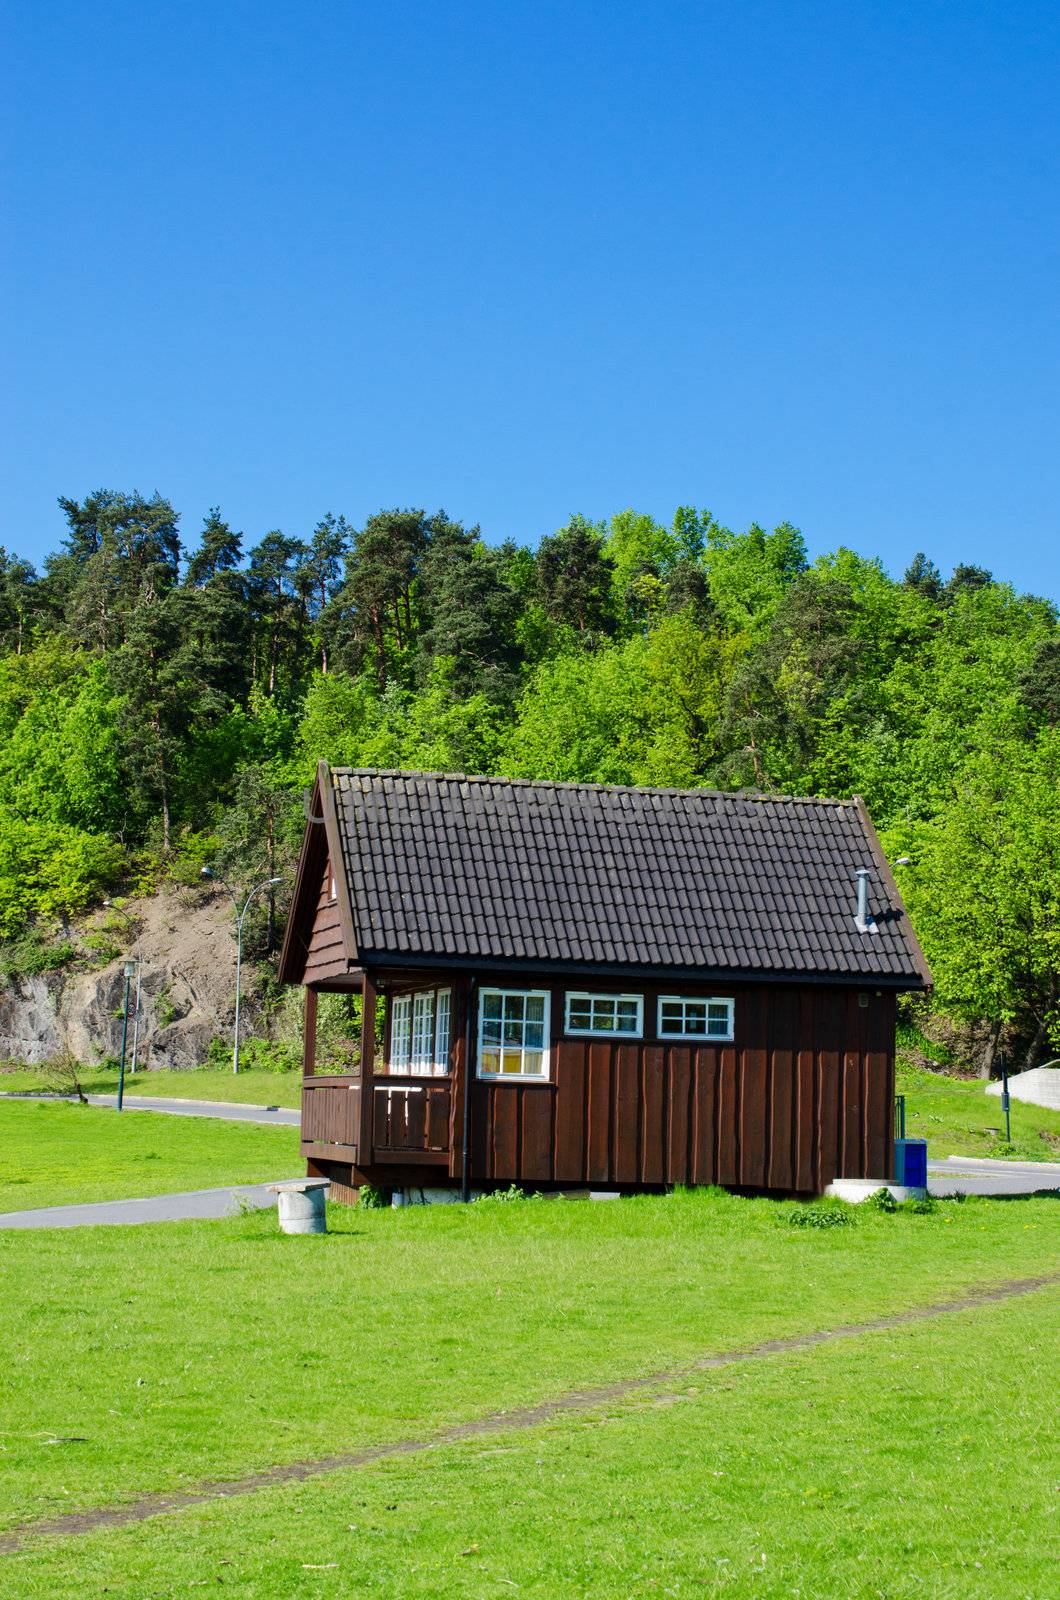 Typical Norwegian house on meadow